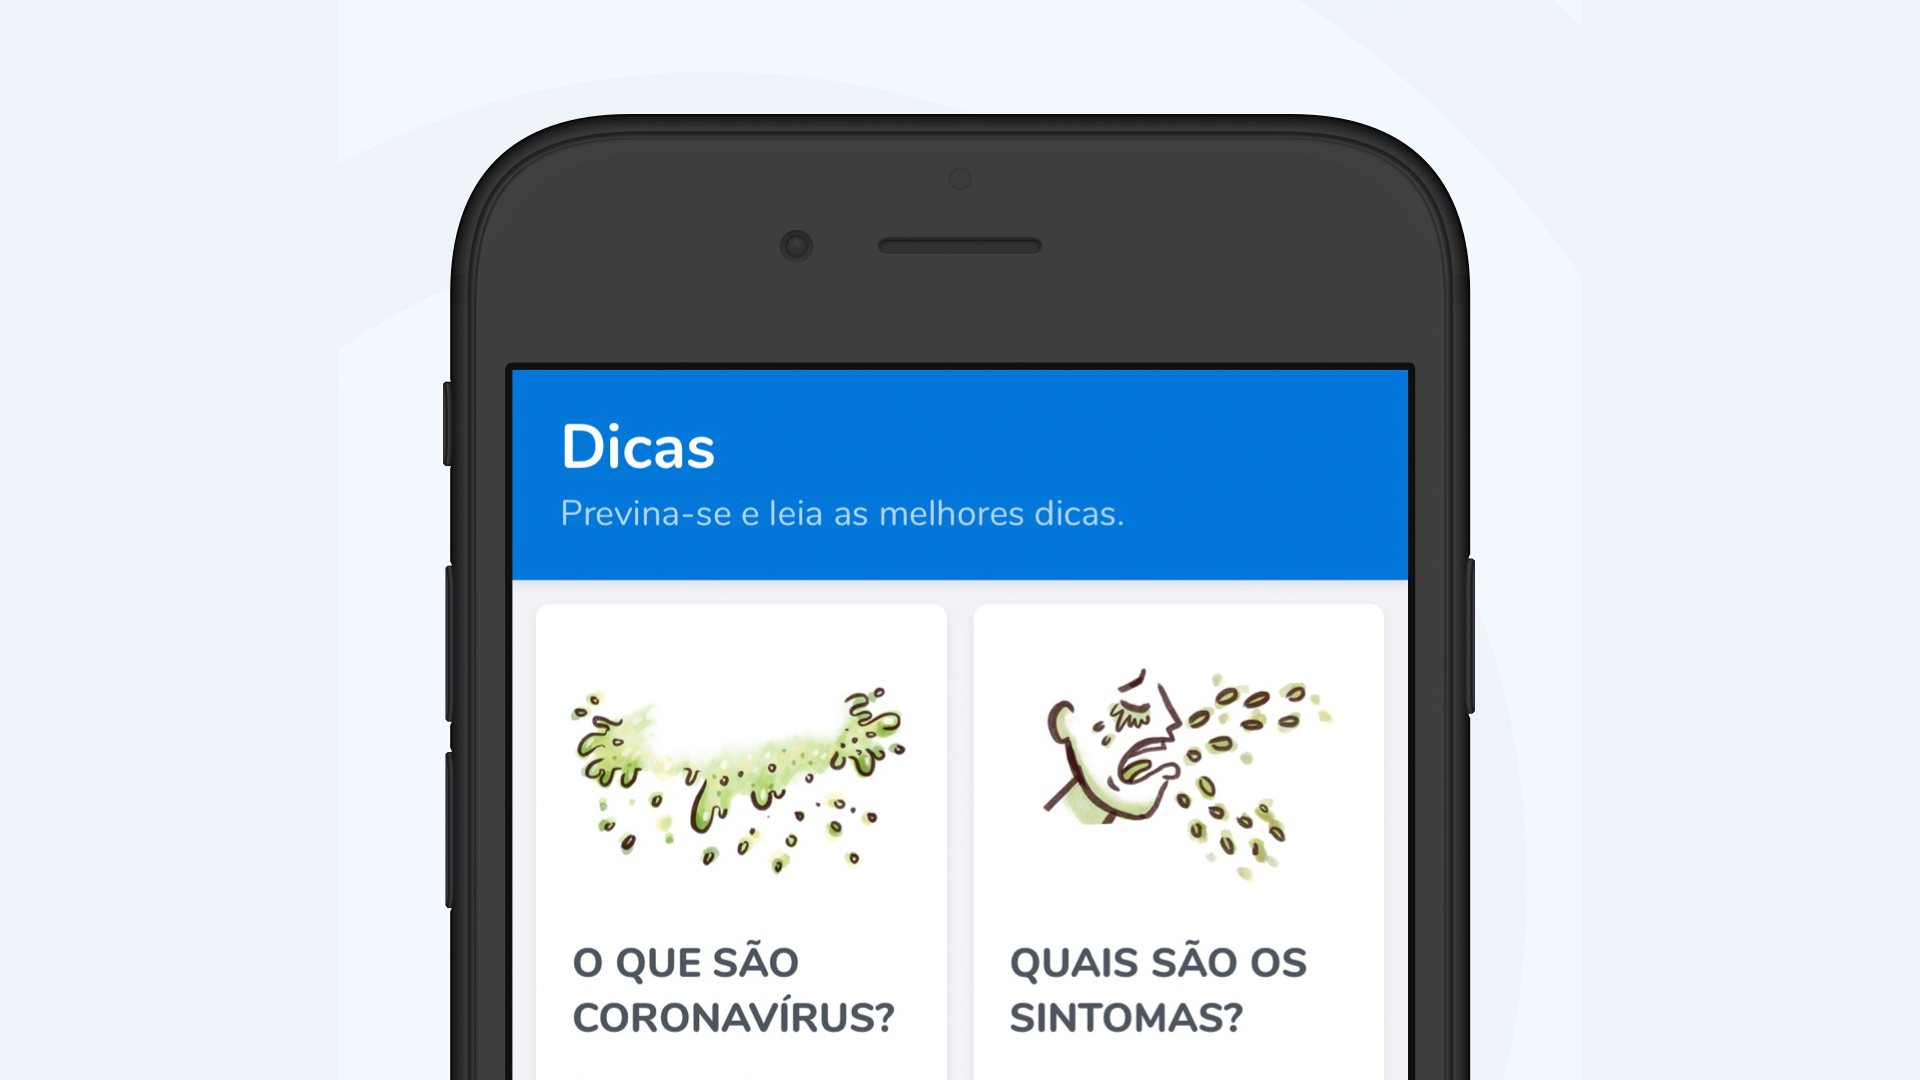 Ministry of Health launches application on the new coronavirus (COVID-19) in Brazil